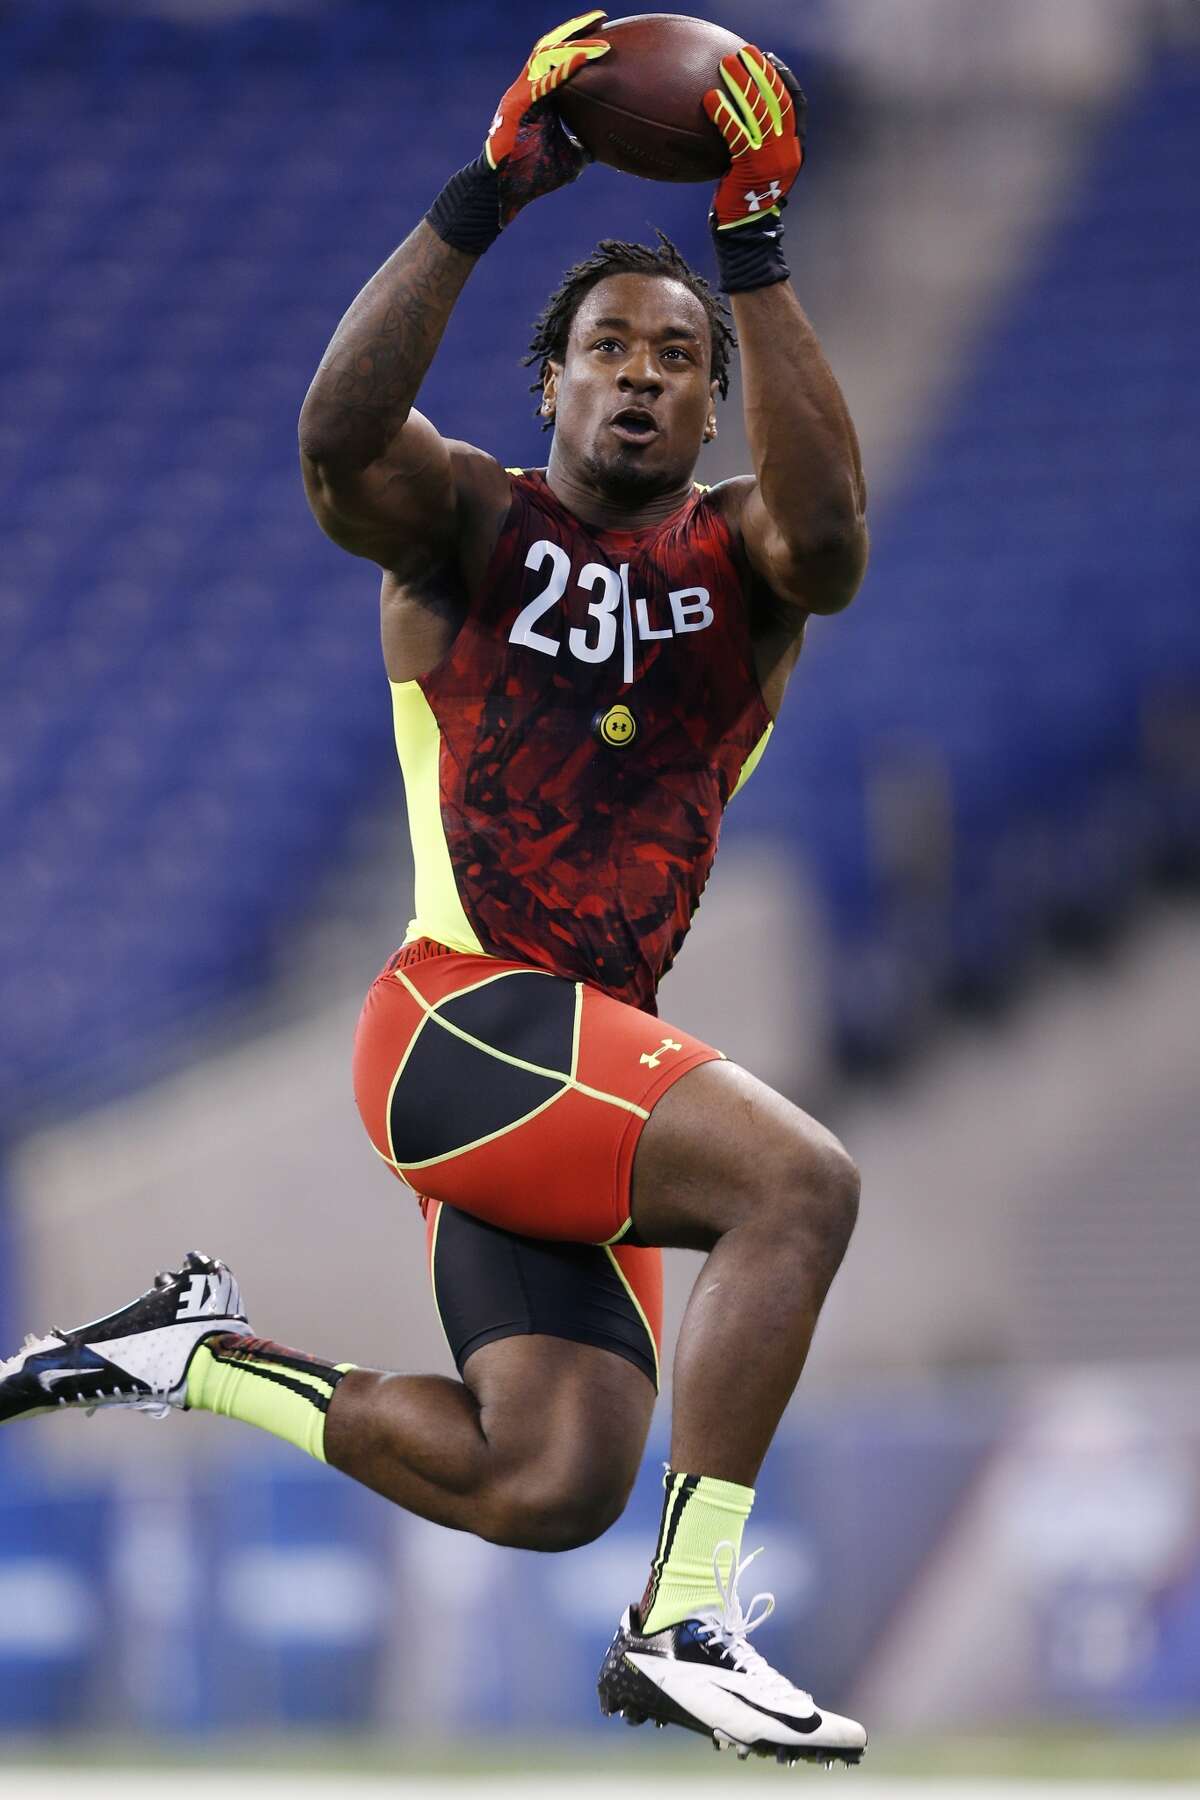 Sio Moore of Connecticut works out during the 2013 NFL Combine at Lucas Oil Stadium on February 25, 2013 in Indianapolis, Indiana. (Photo by Joe Robbins/Getty Images)